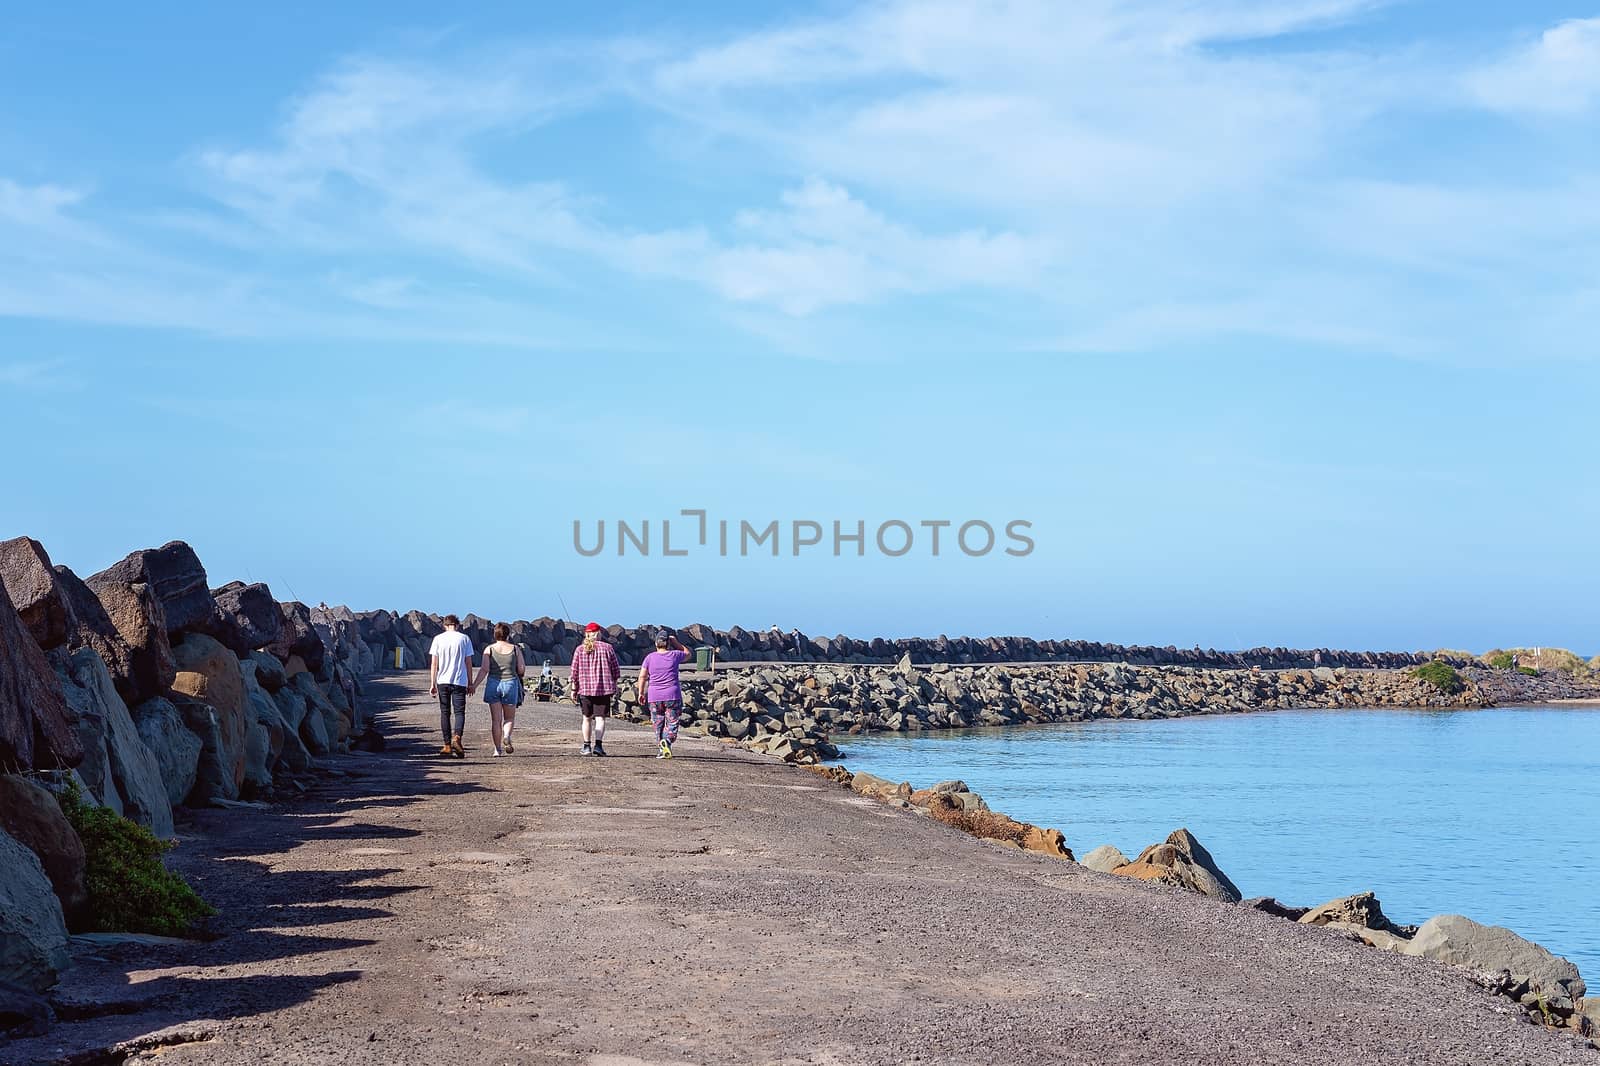 A family group of two young people and two older persons, unidentified, walking slowing along a marina breakwater wall on a bright sunny day with blue sky and water.